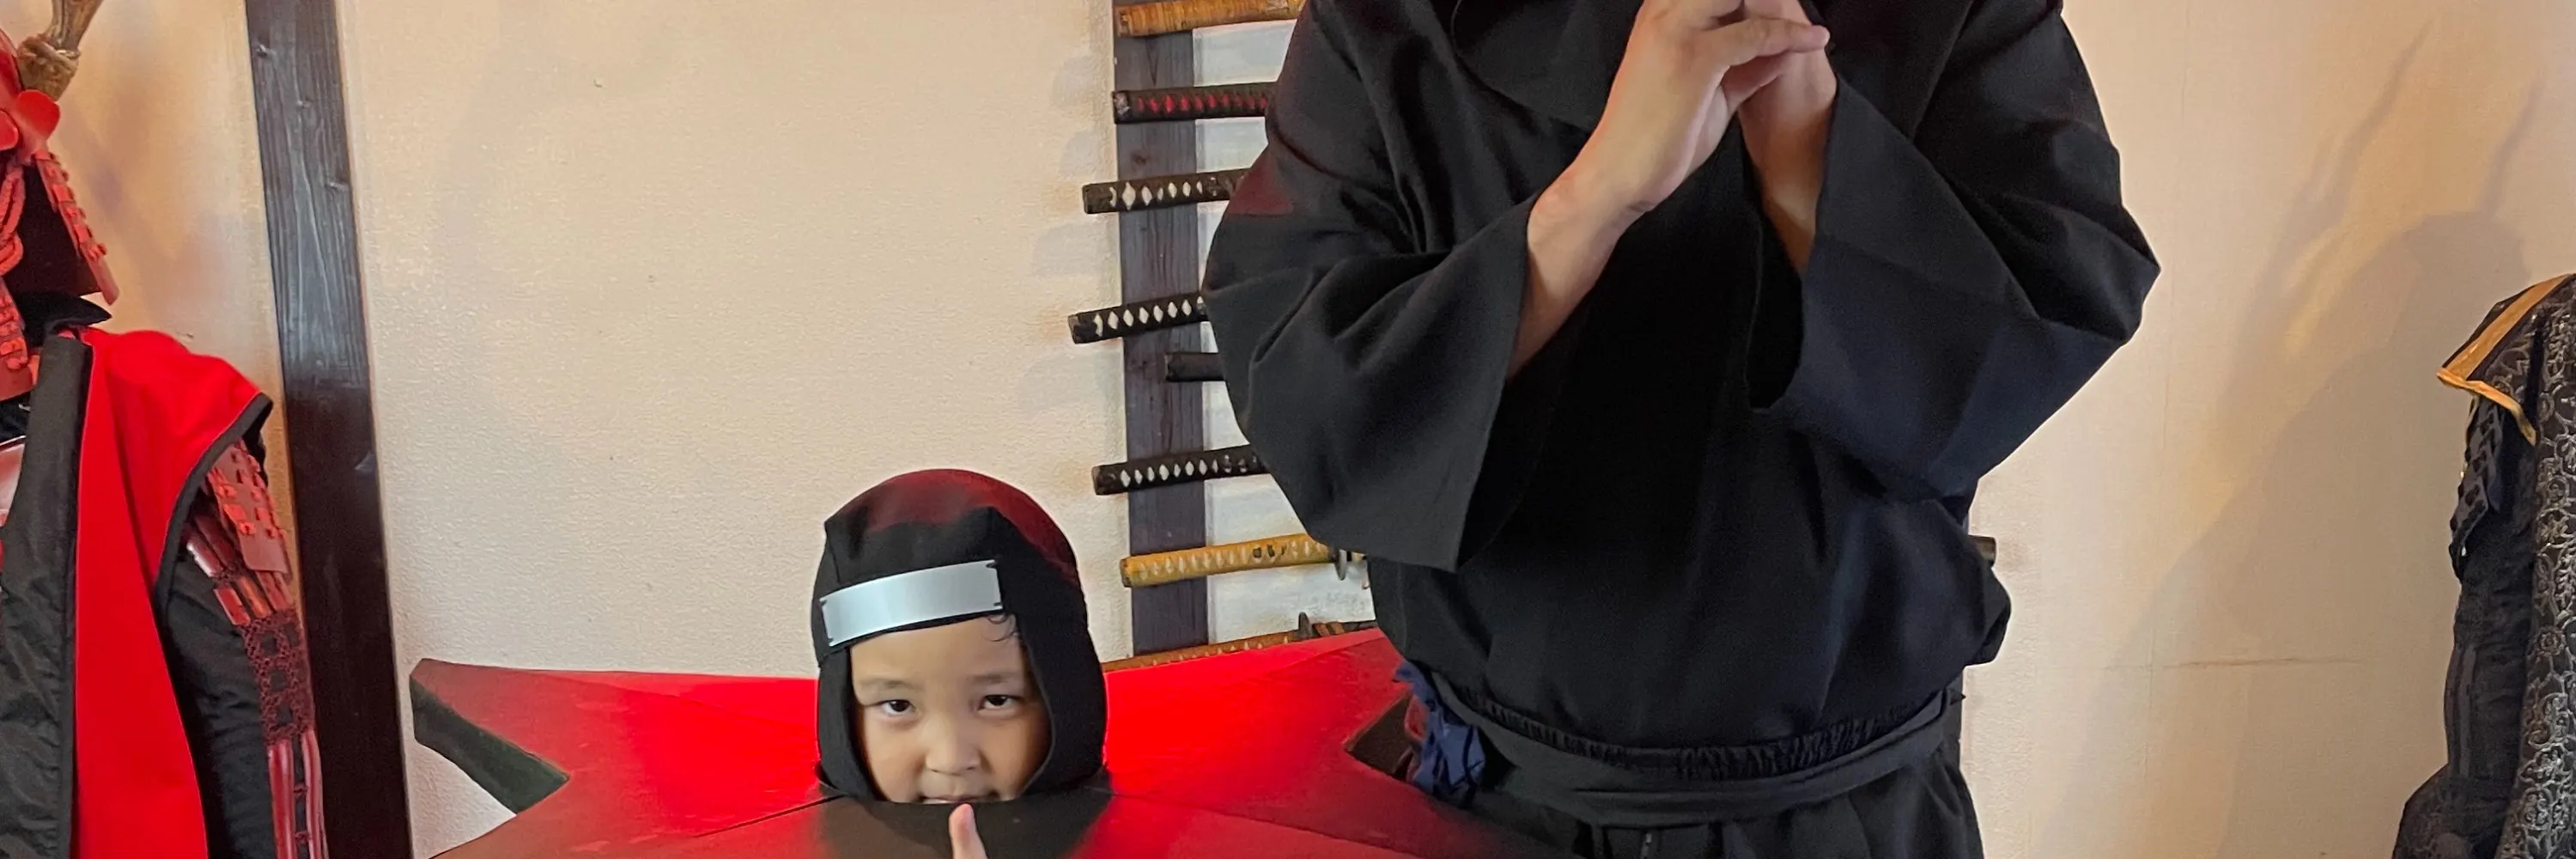 Ninja Workshop and Costume Rental Experience in Osaka - Transform Into a Ninja for a Day in Osaka